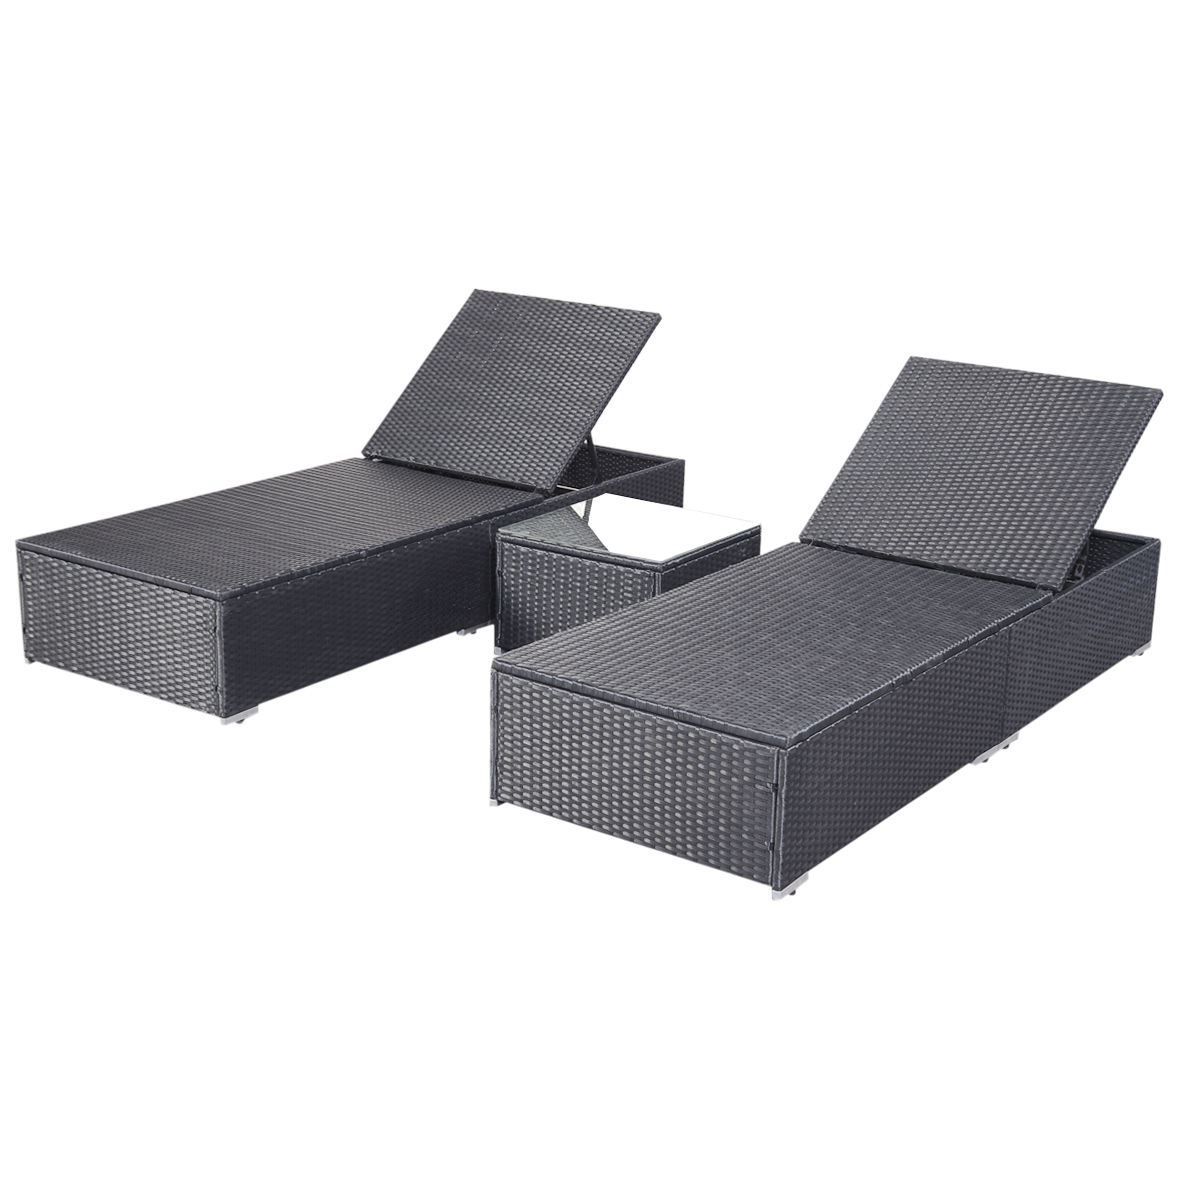 Preferred Grey Wicker Chaise Lounge Chairs Regarding Grey Wicker Lounge Chairs • Lounge Chairs Ideas (View 1 of 15)